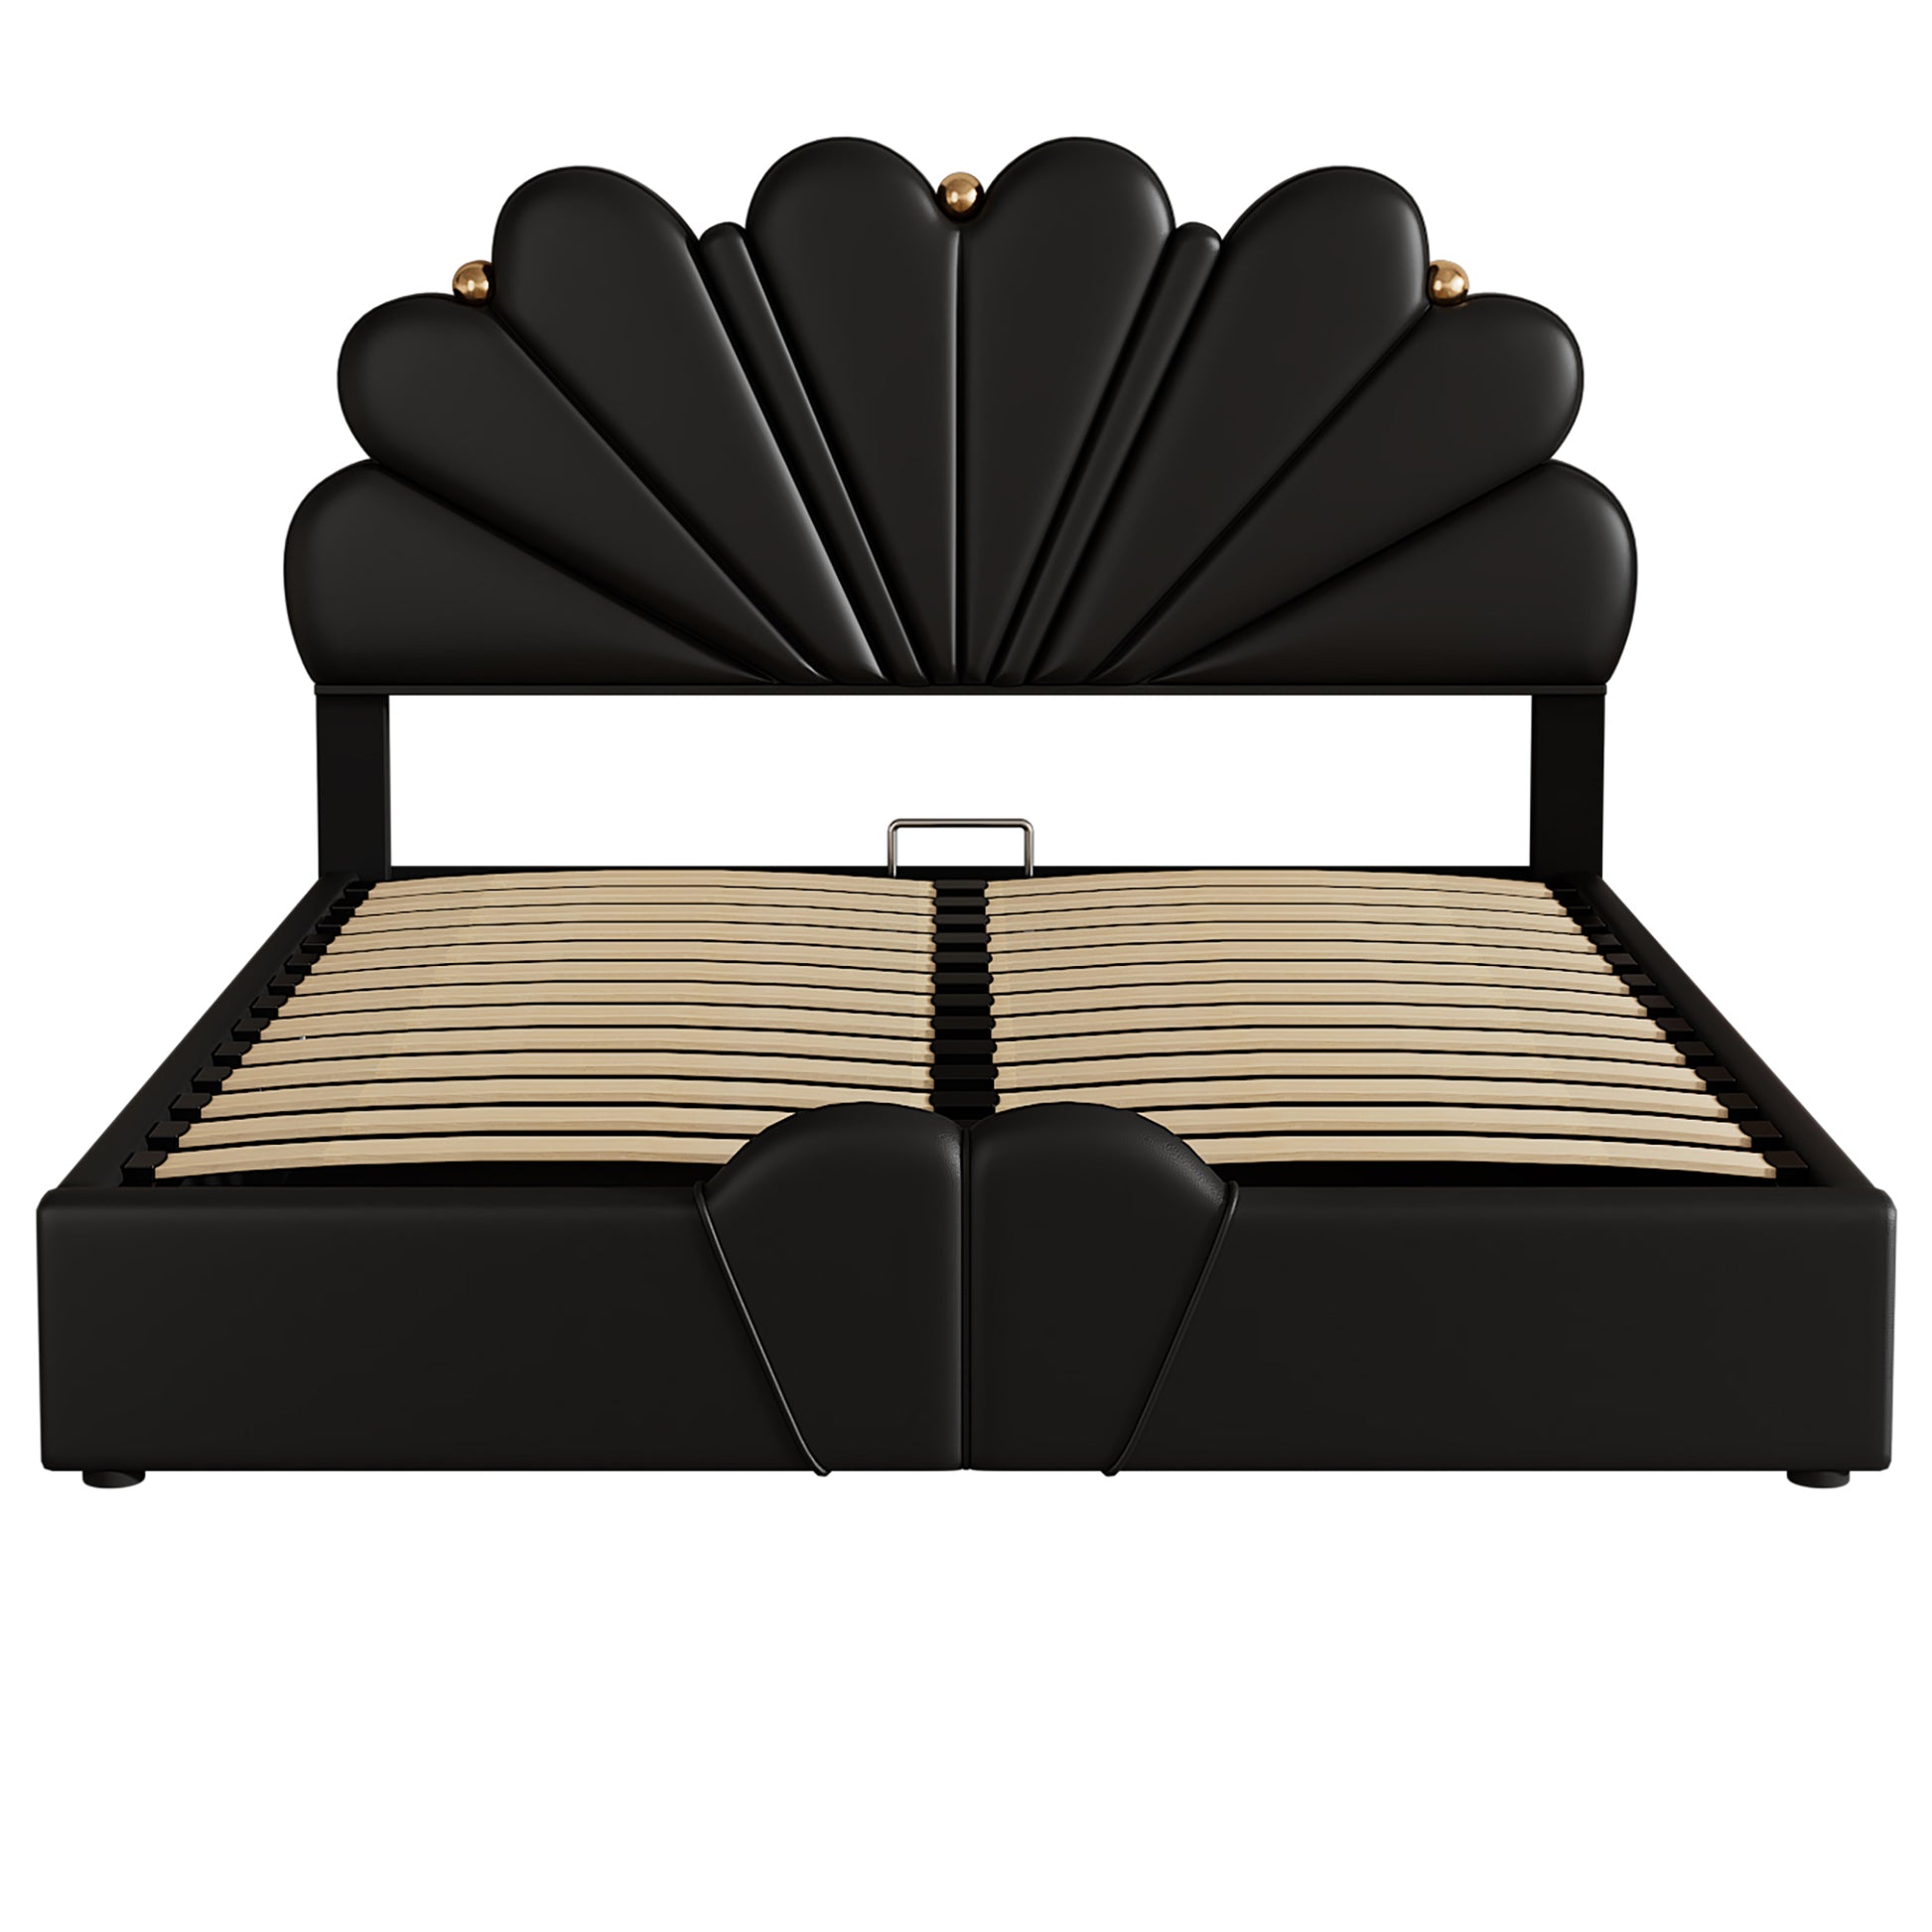 Queen Size Upholstered  Petal Shaped Platform Bed  with Hydraulic Storage System, PU Storage Bed, Decorated with metal balls, Black - Enova Luxe Home Store